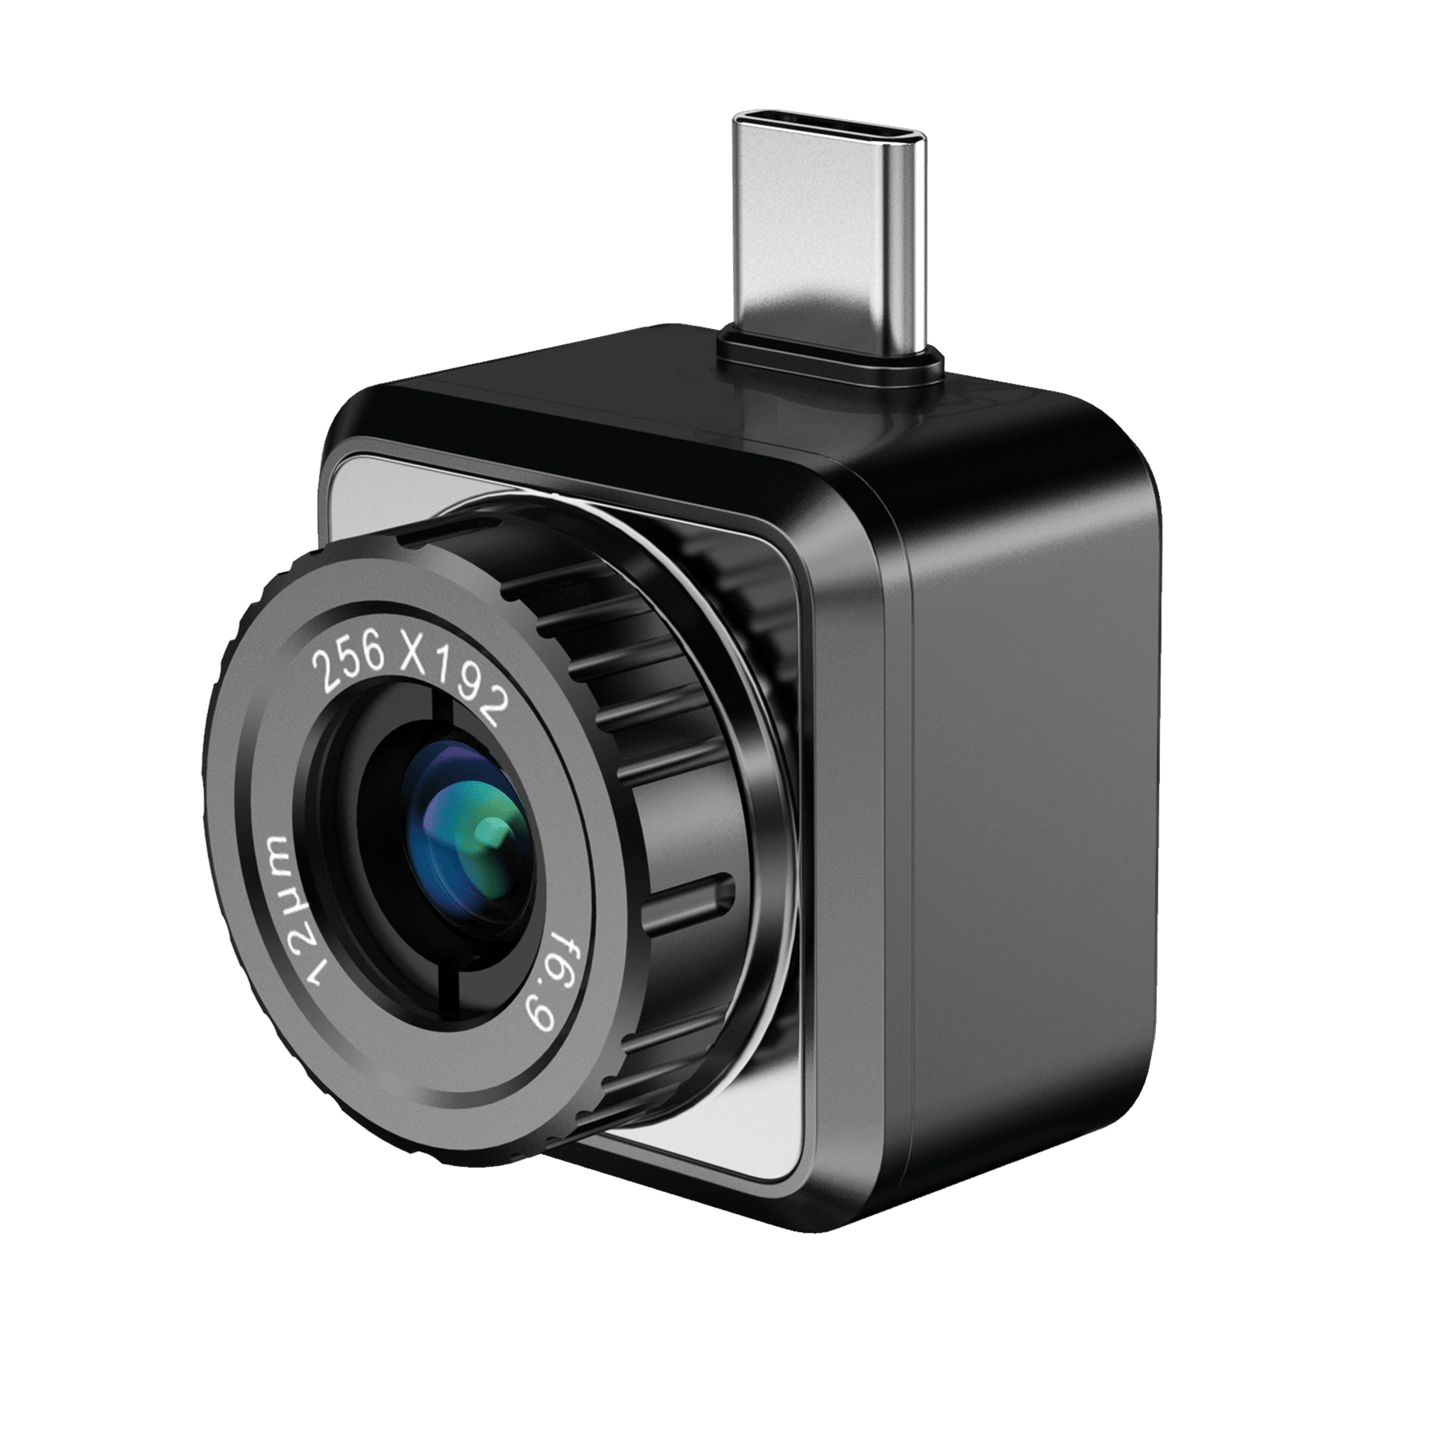 Hikmicro Mini2Plus Thermal Imaging Camera for Android Front Left View showing Connector and Manual Focus Adjustment Ring